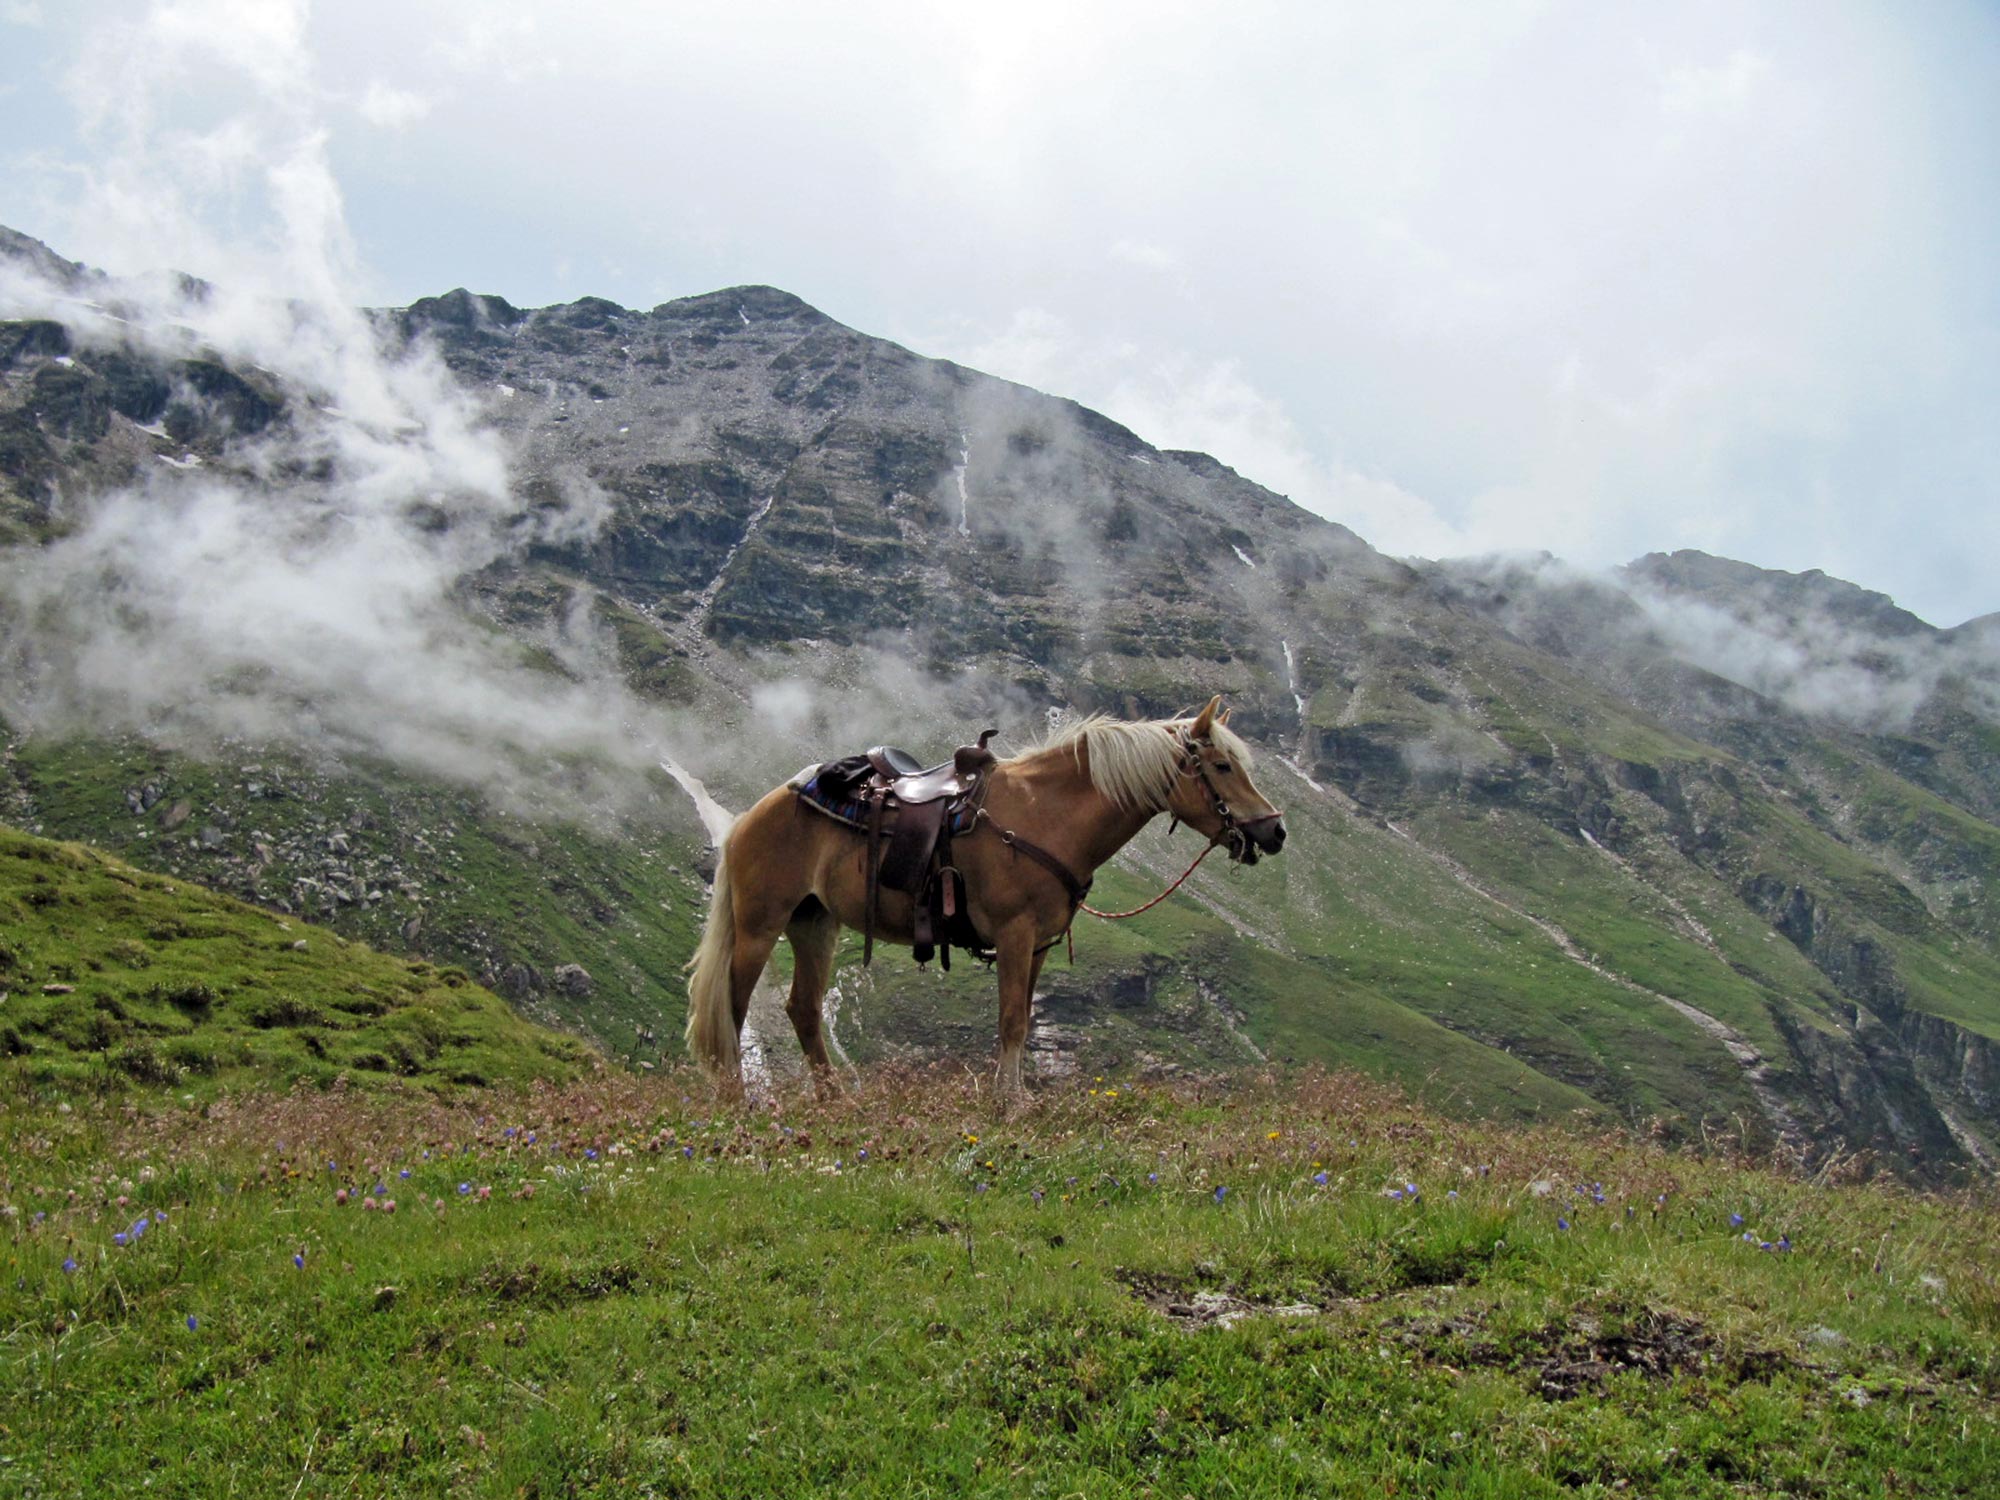 Riding experiences in the South Tyrolean Alps